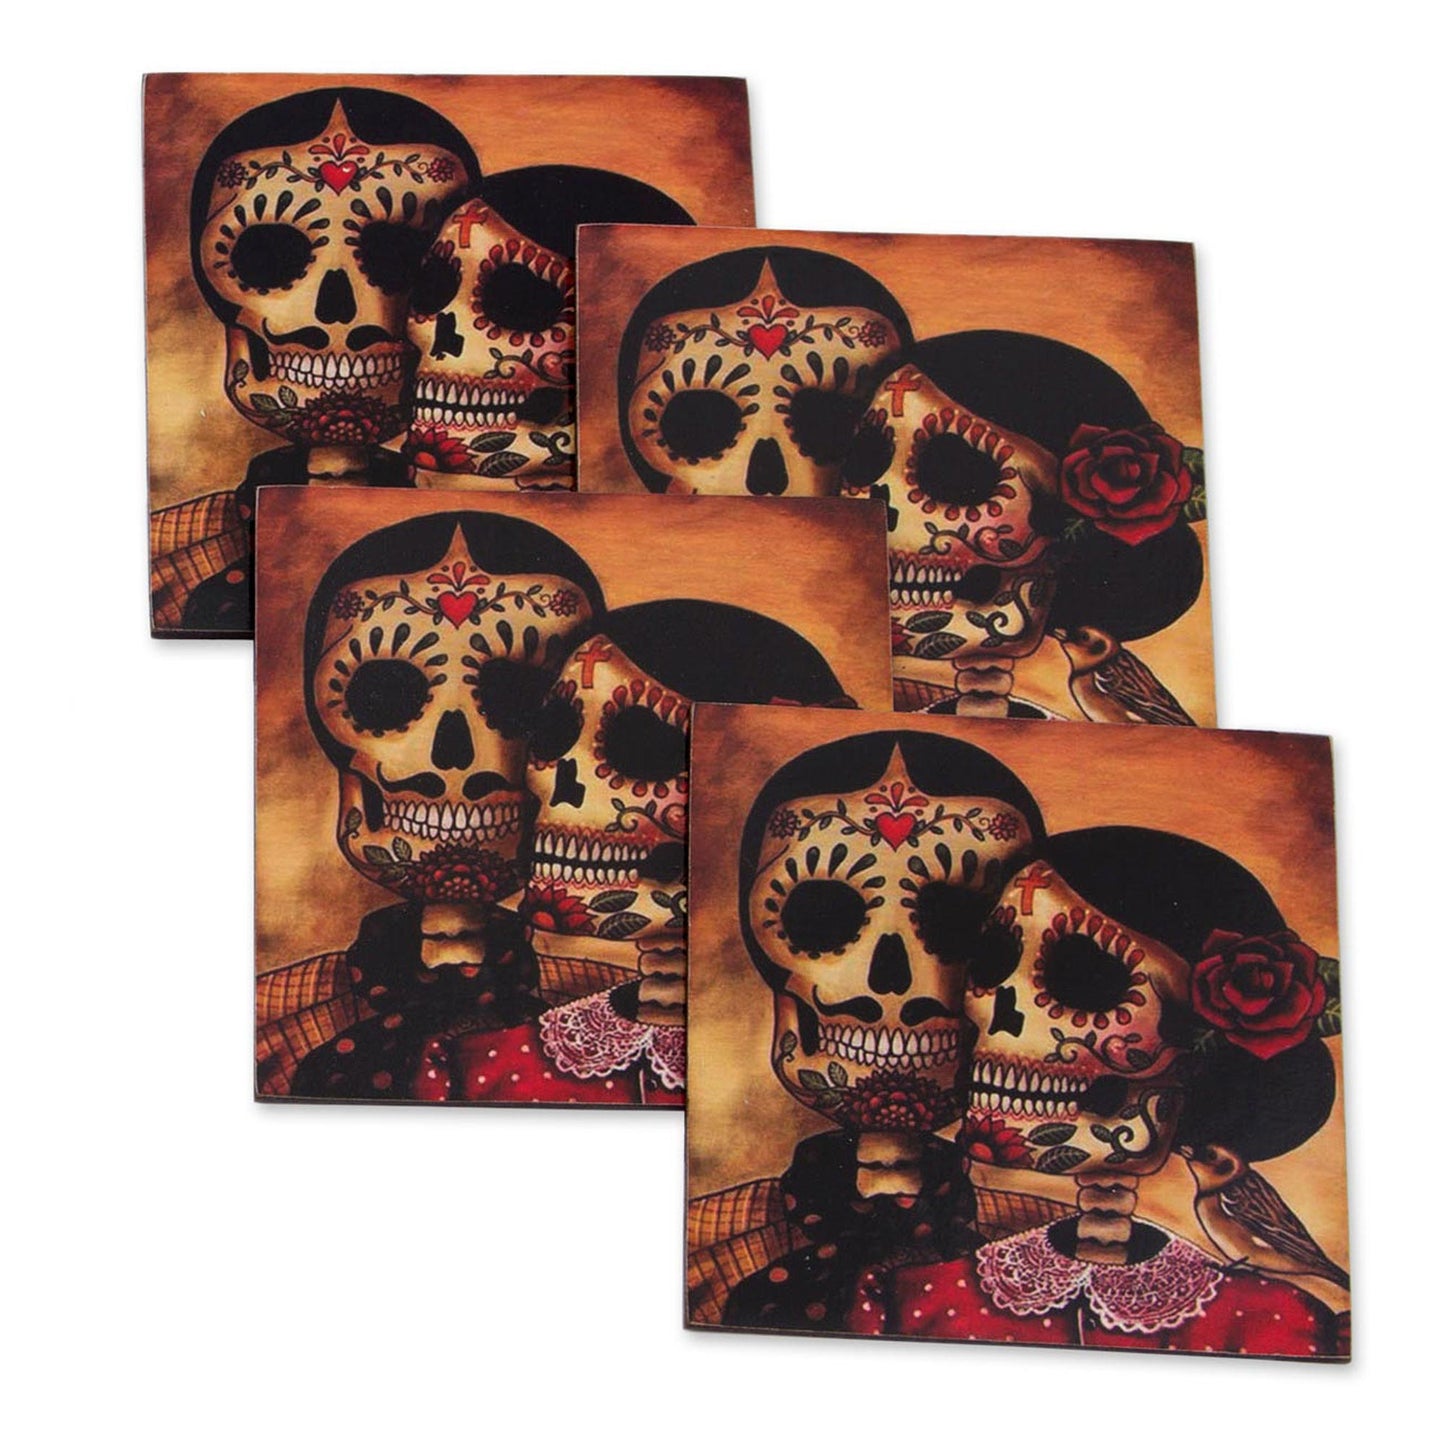 Day of the Dead Romance Set of 4 Decoupage Coasters with Day of the Dead Theme